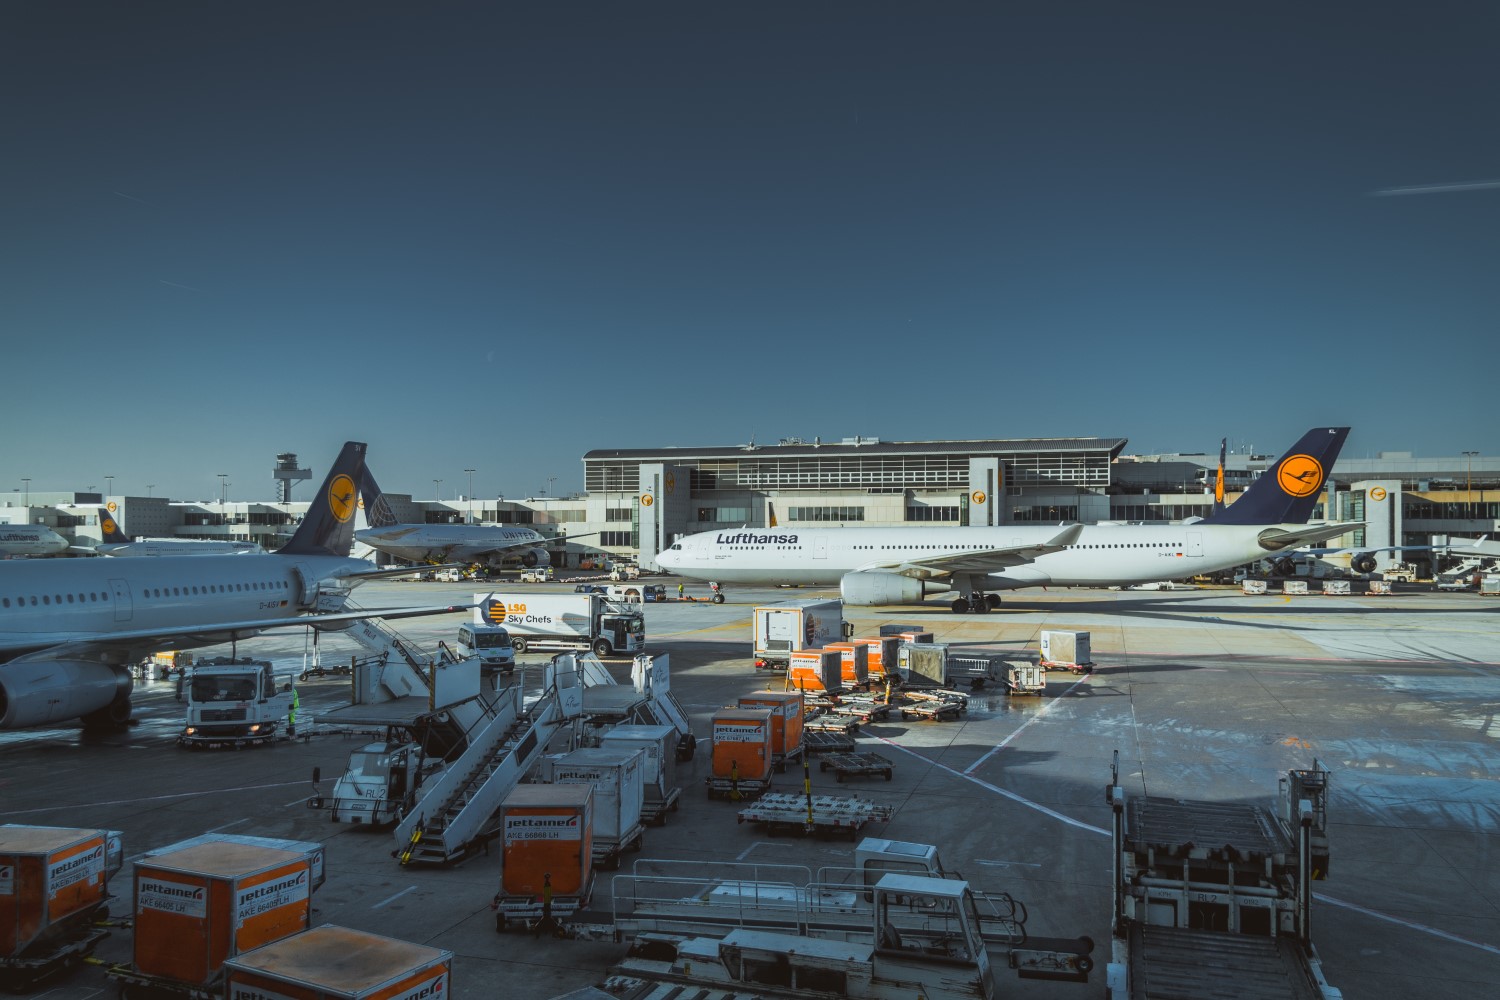 Frankfurt is one of the busiest airports in Europe